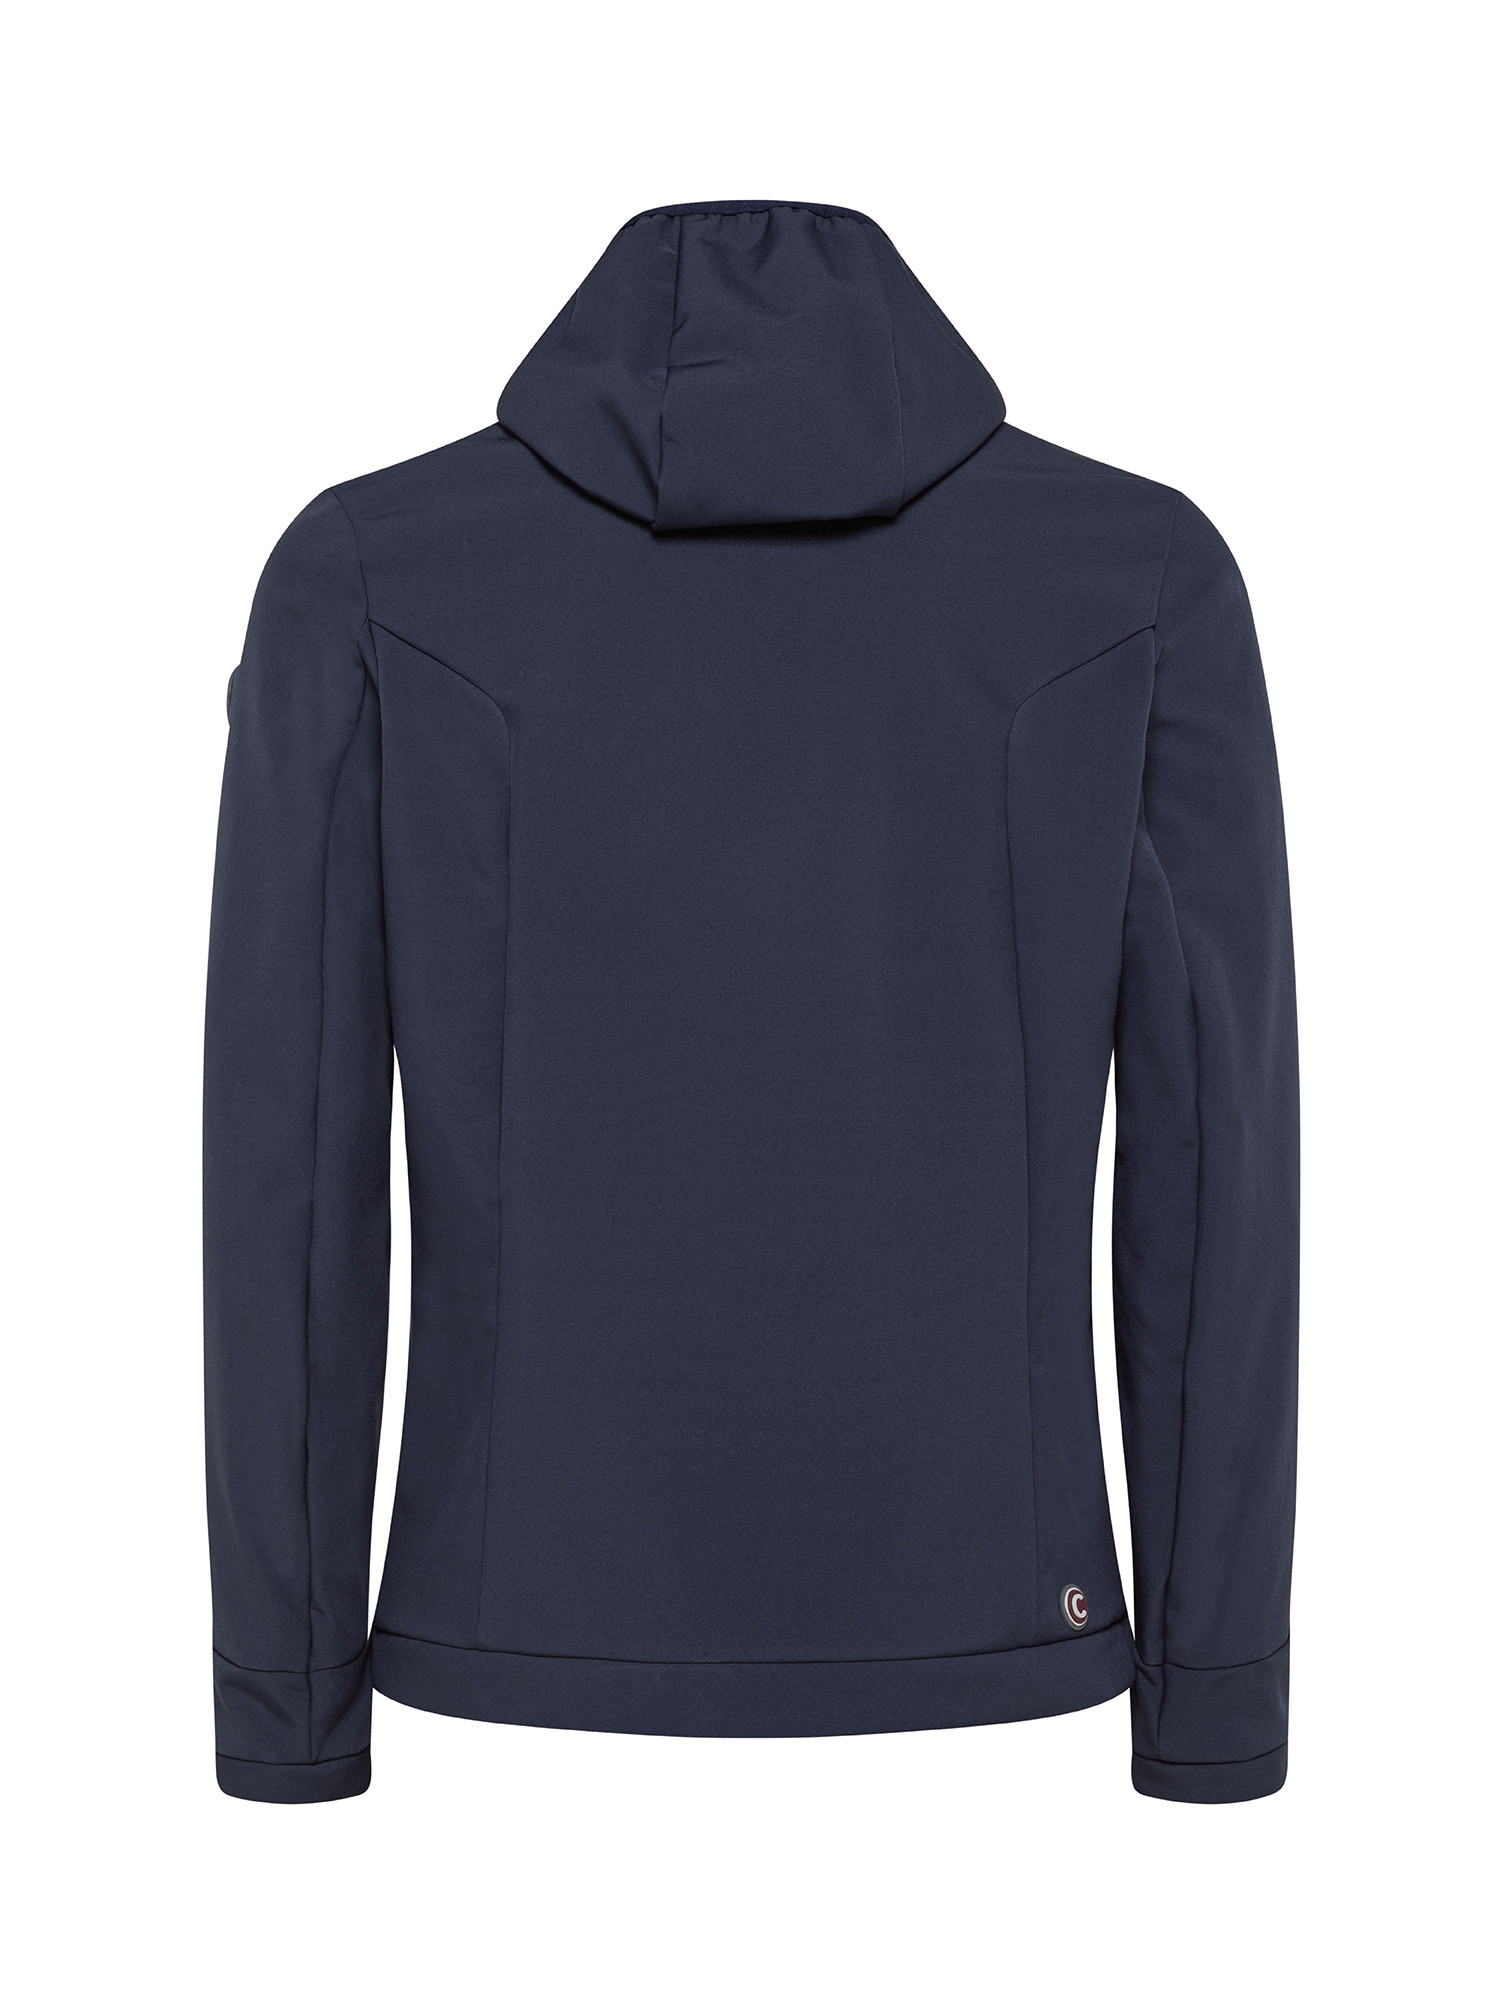 Hoodie jacket in soft three-layer fabric, Blue, large image number 1